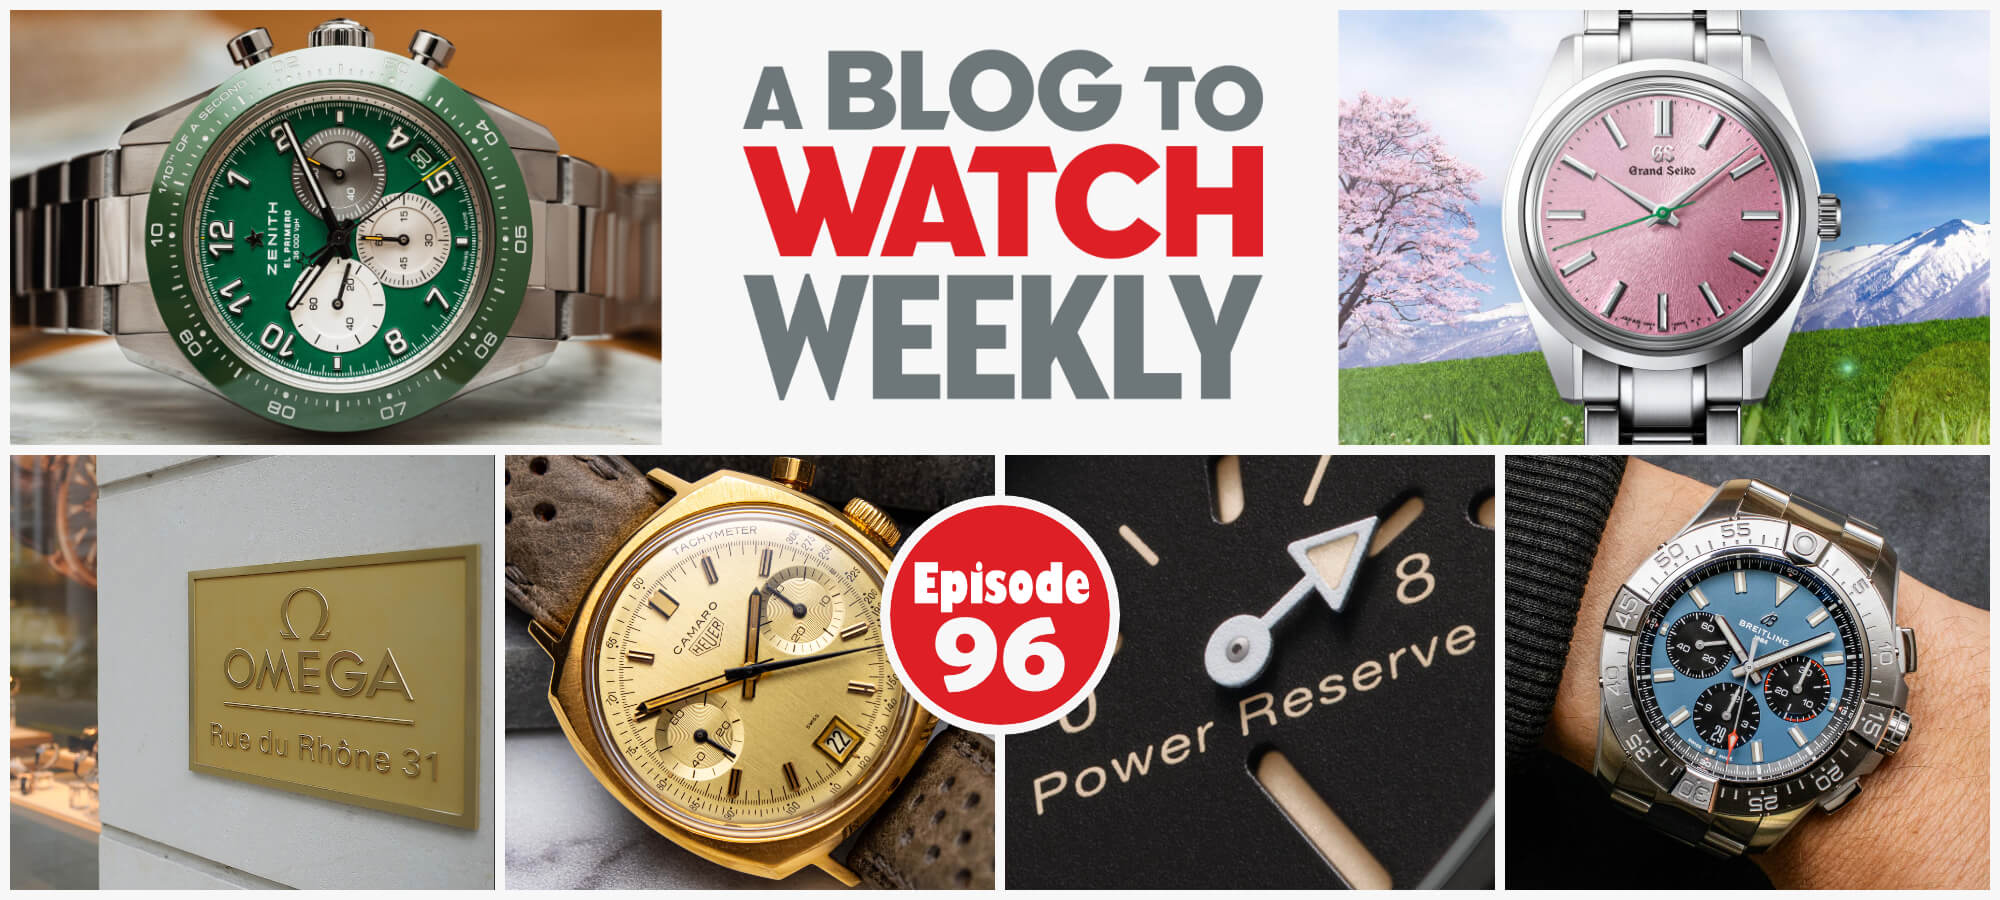 aBlogtoWatch Weekly Episode 96